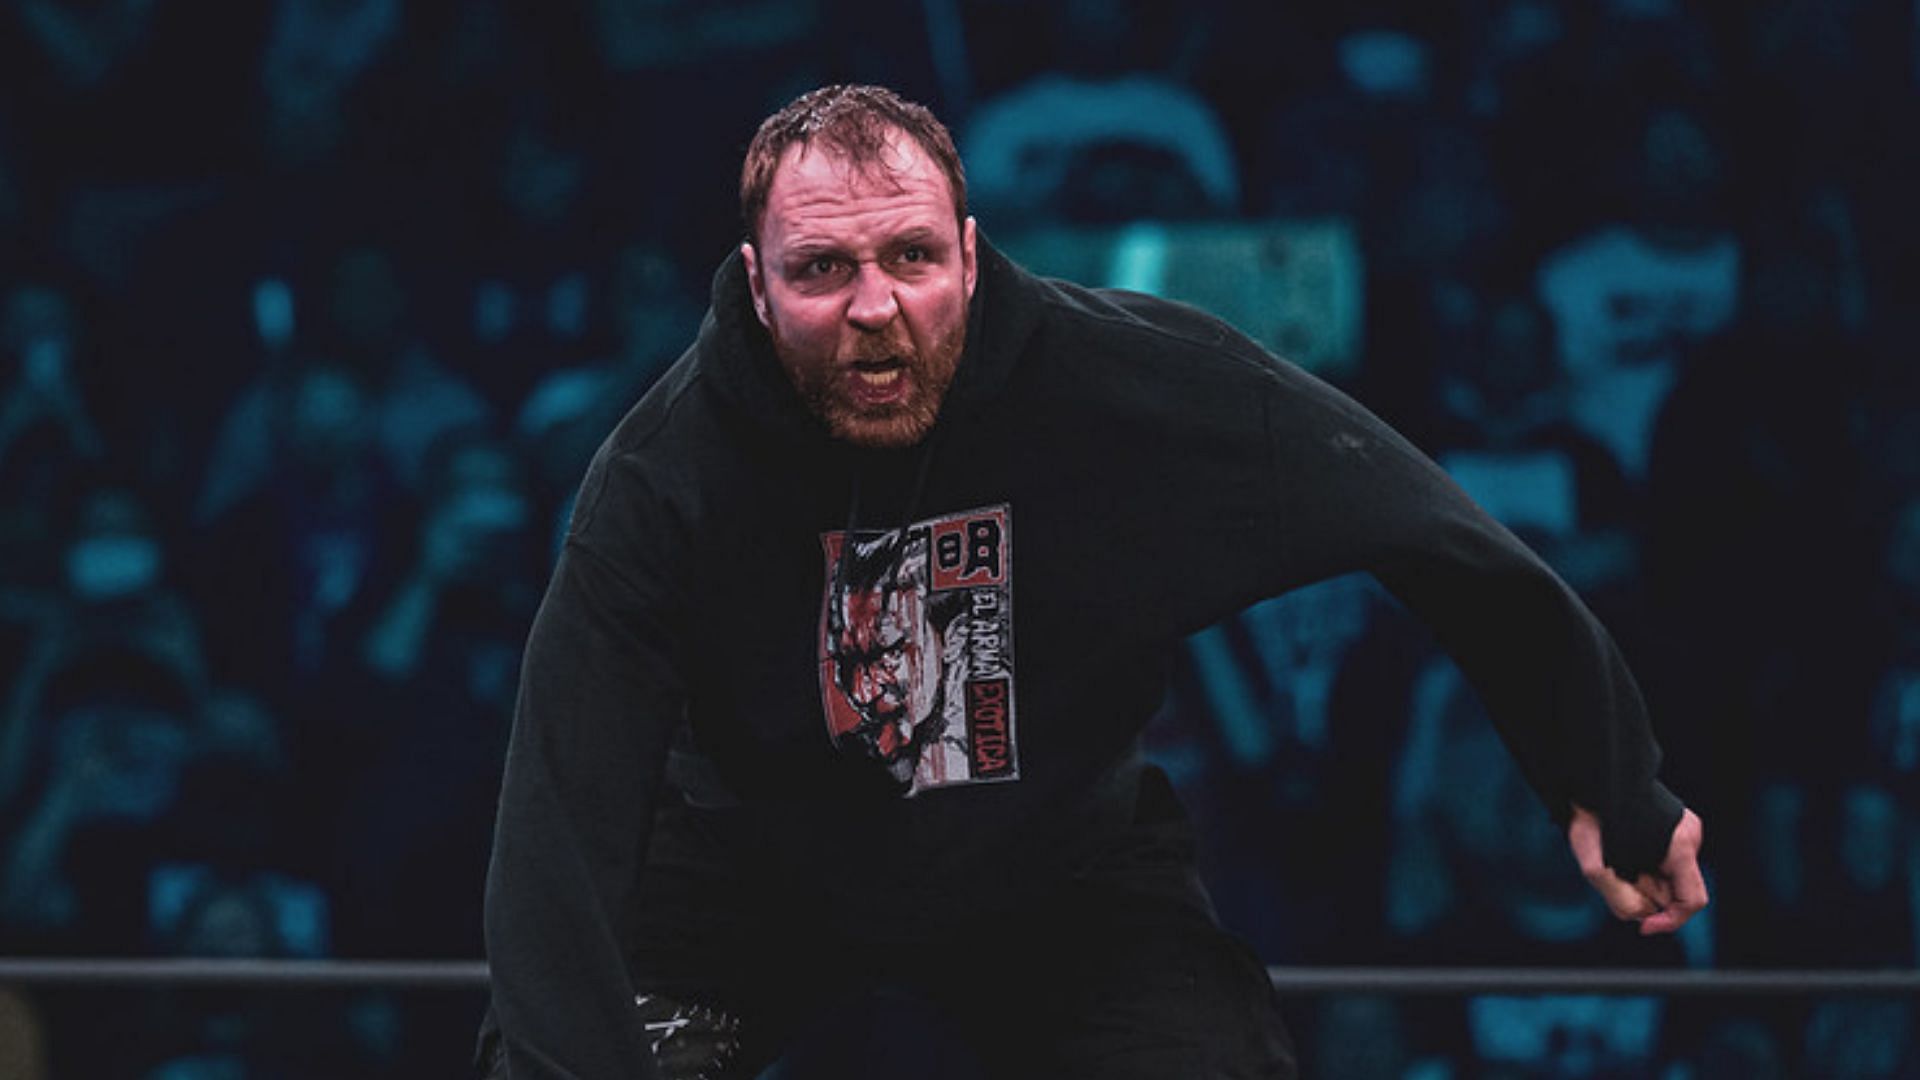 Jon Moxley making his entrance at an AEW event in 2022 (credit: Jay Lee Photography)